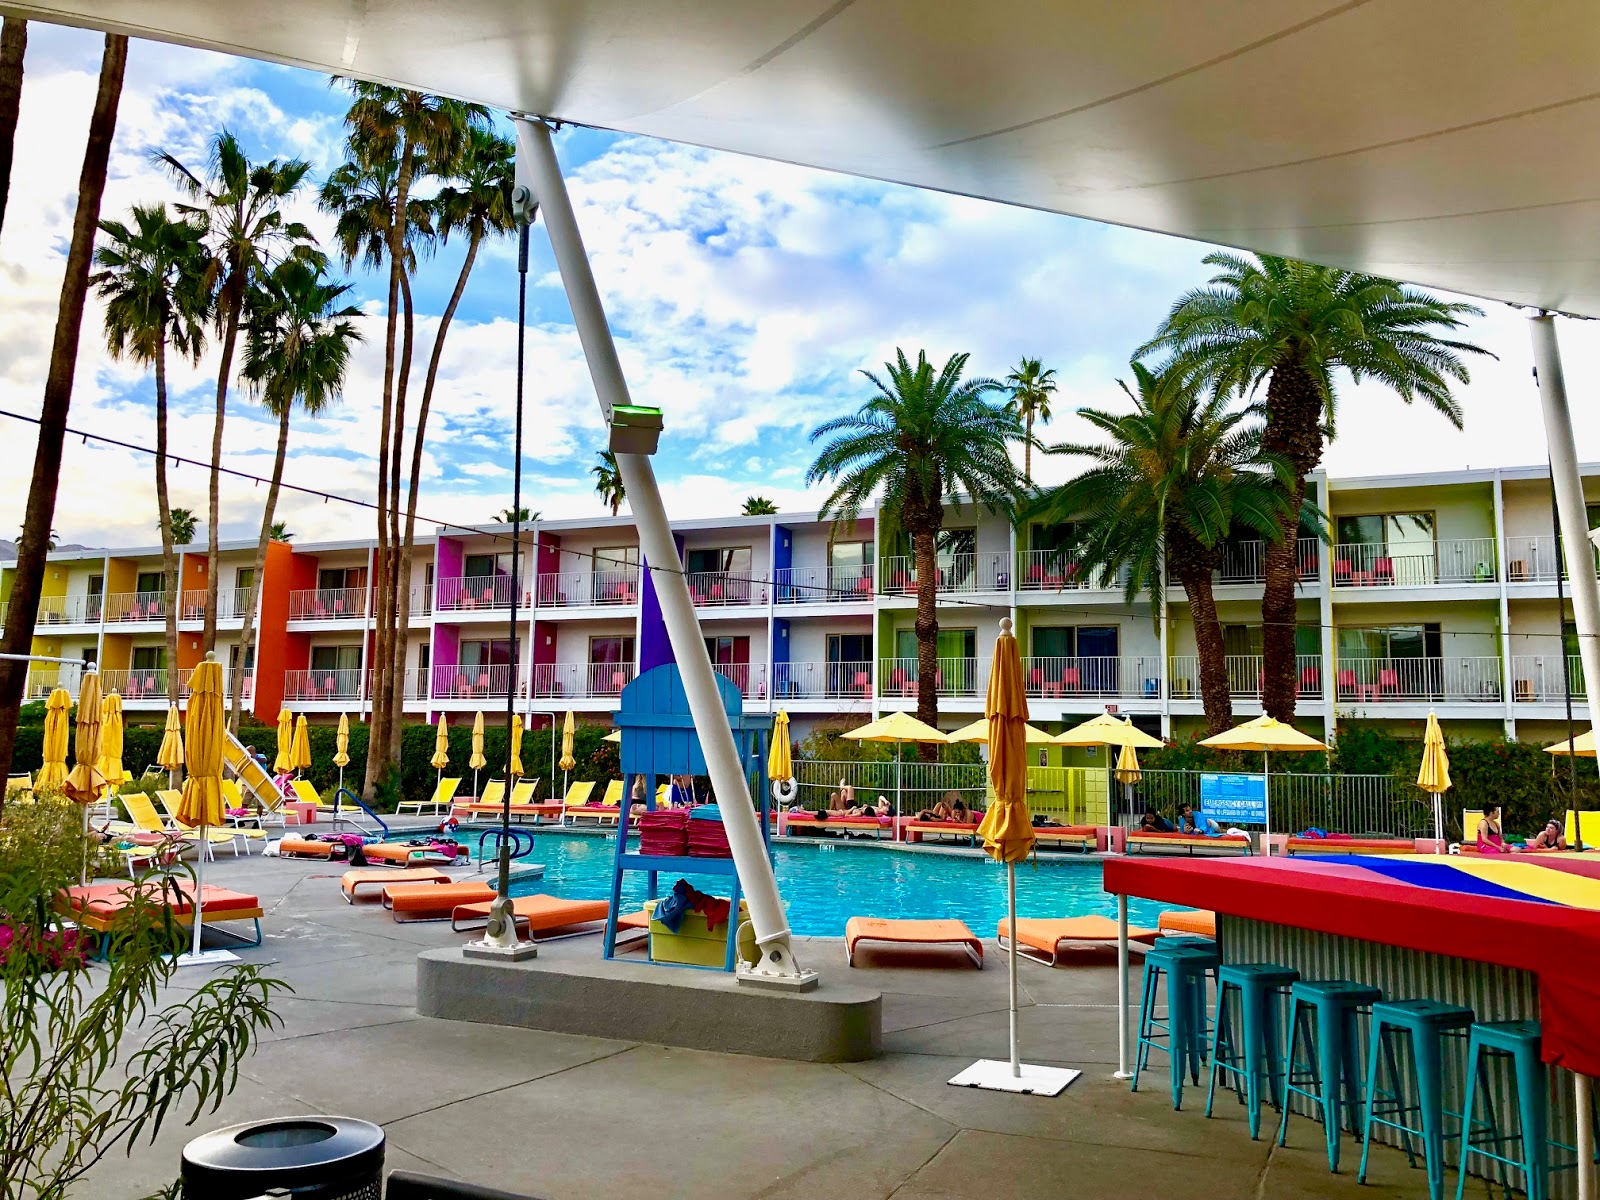 The Saguaro Palm Springs Hotel Review